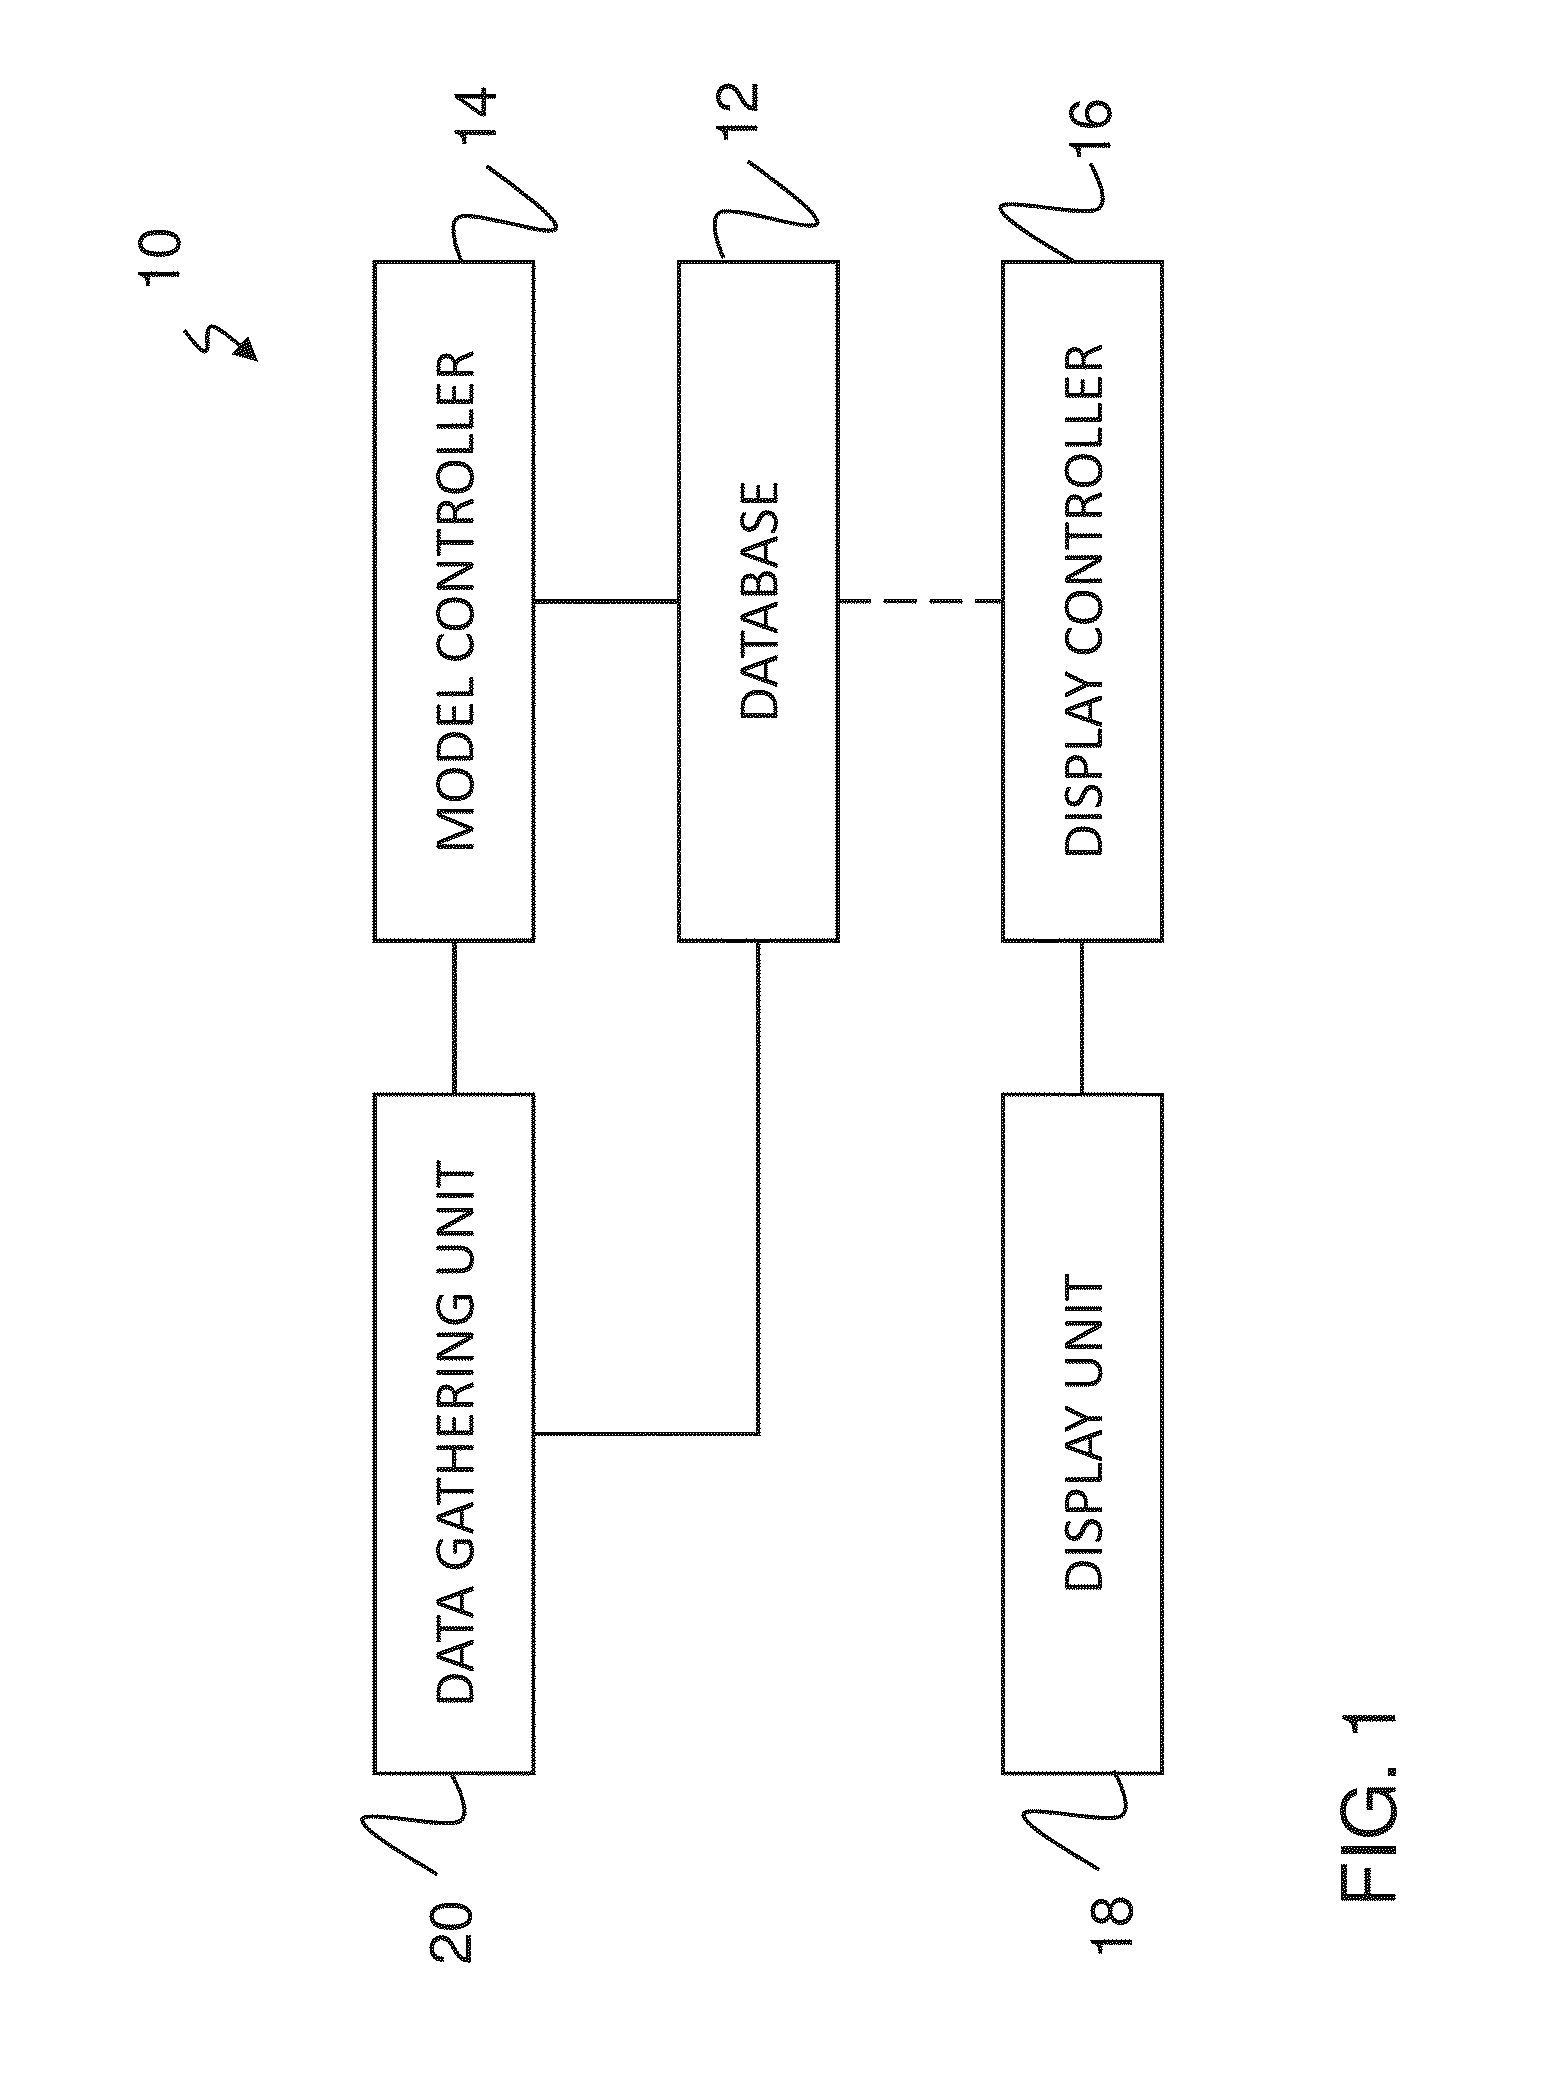 System, method, and non-transitory computer-readable storage media related to correction of vision defects using a visual display